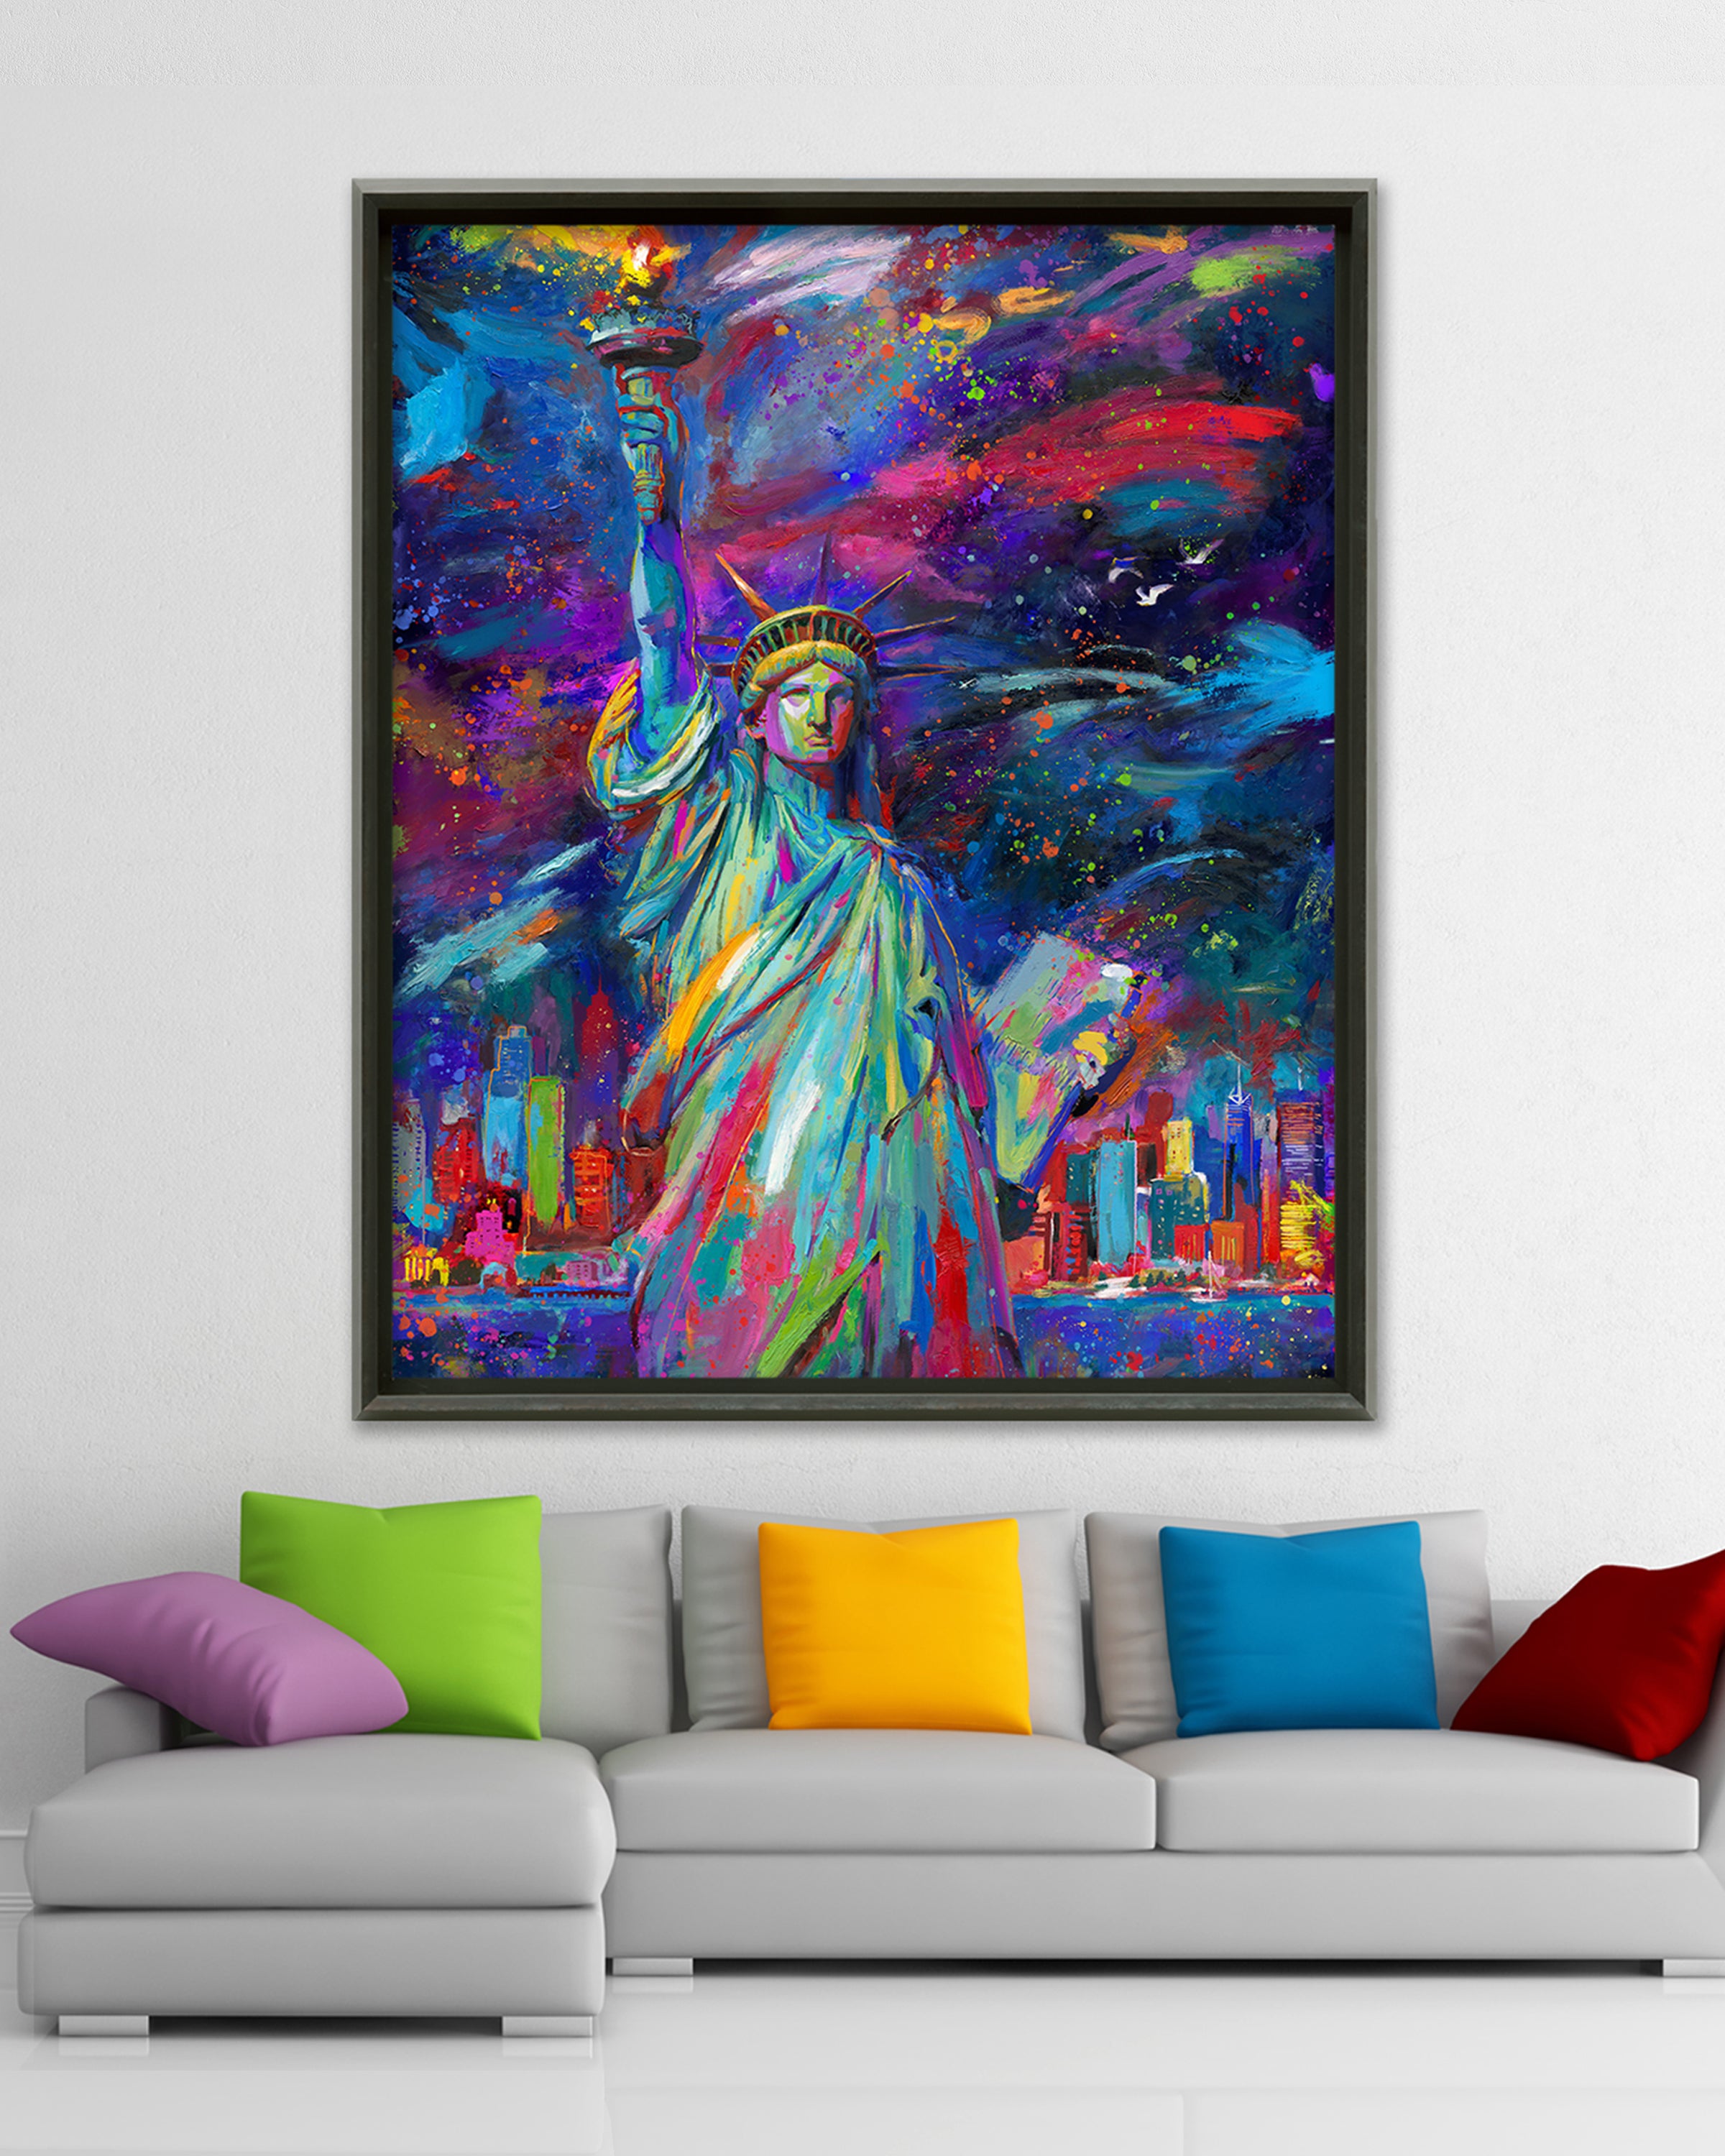 Oil on canvas original painting of the iconic Statue of Liberty in New York City, emblem and symbol of freedom and courage to make change in America and the world, shown in vibrant turquoise against a dark blue and purple sky, in colorful brushstrokes, color expressionism style in a room setting.